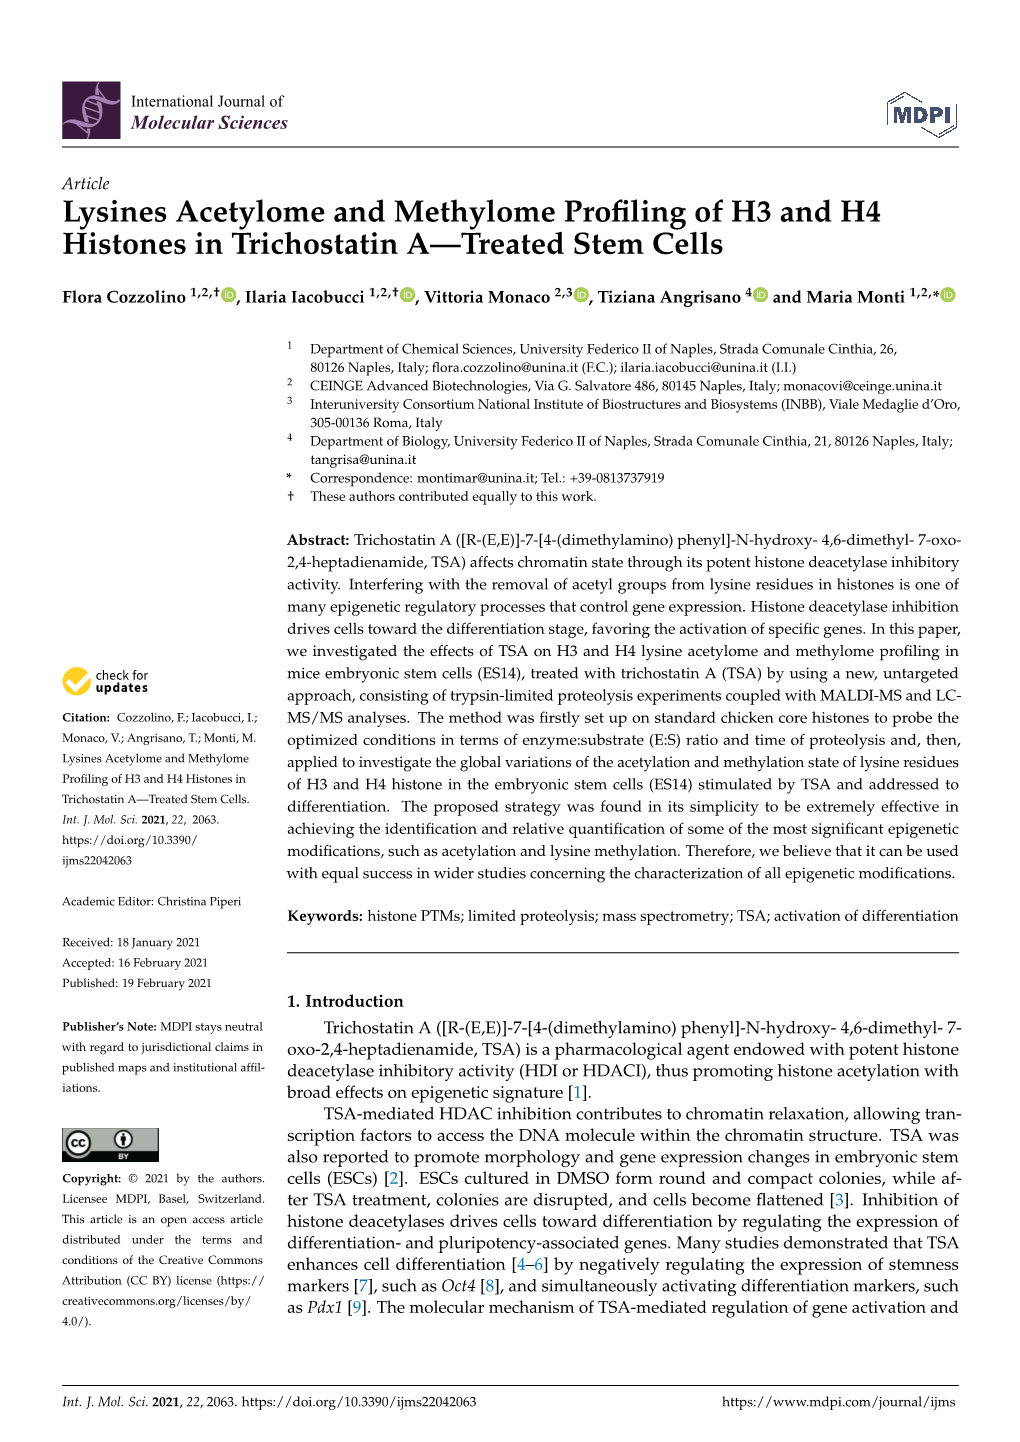 Lysines Acetylome and Methylome Profiling of H3 and H4 Histones in Trichostatin A—Treated Stem Cells